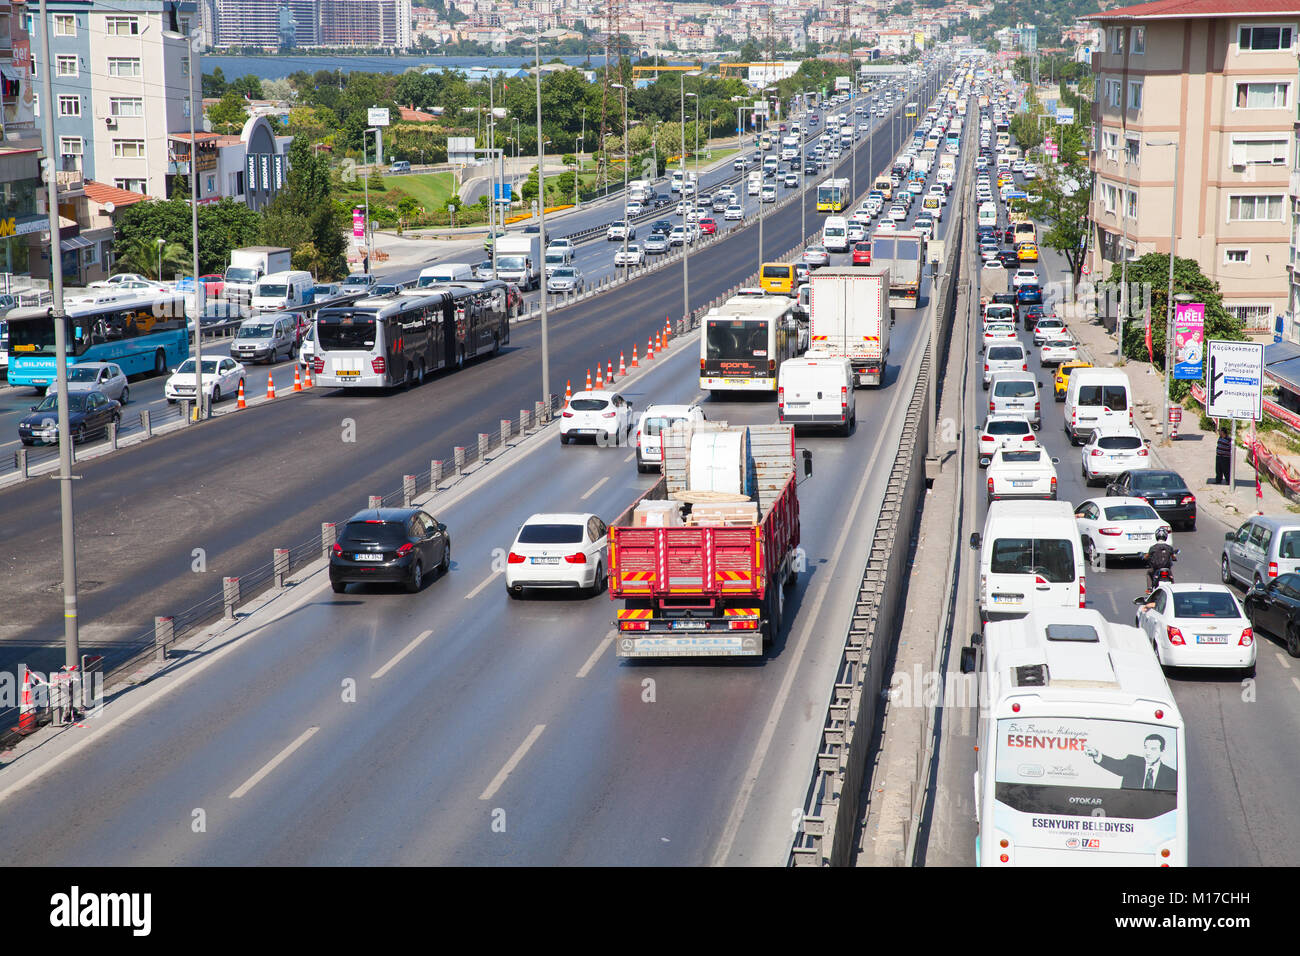 Istanbul, Turkey - June 27, 2016: Traffic flowing at E5 highway, Avcilar district of Istanbul Stock Photo